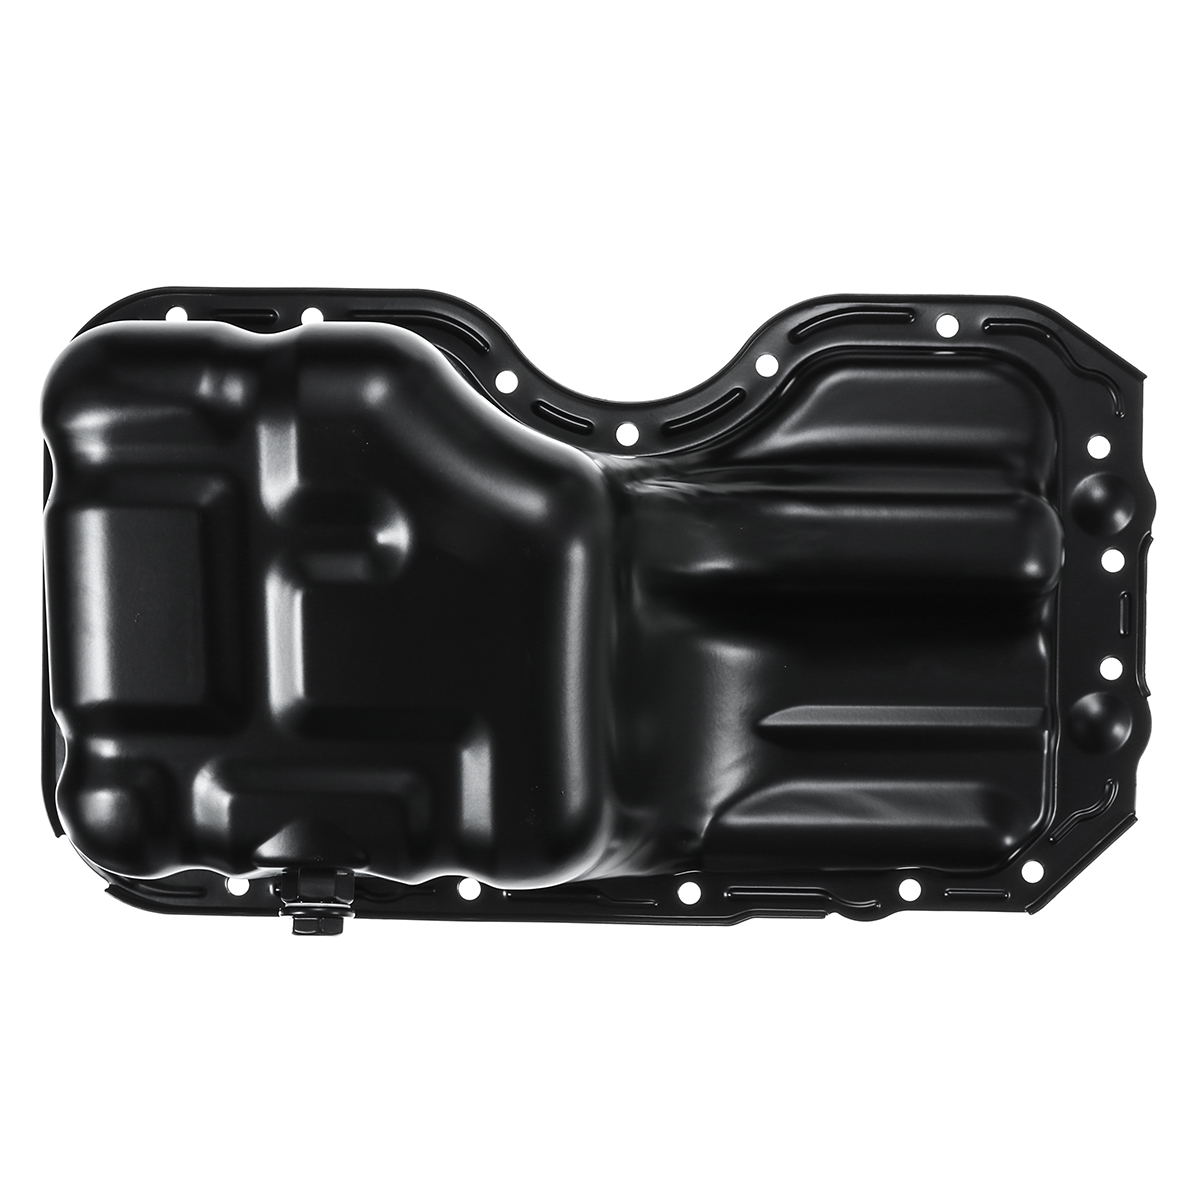 Oil Sump Pan Fit for MAZDA 2 MK2 / MAZDA 3 Stainless Steel